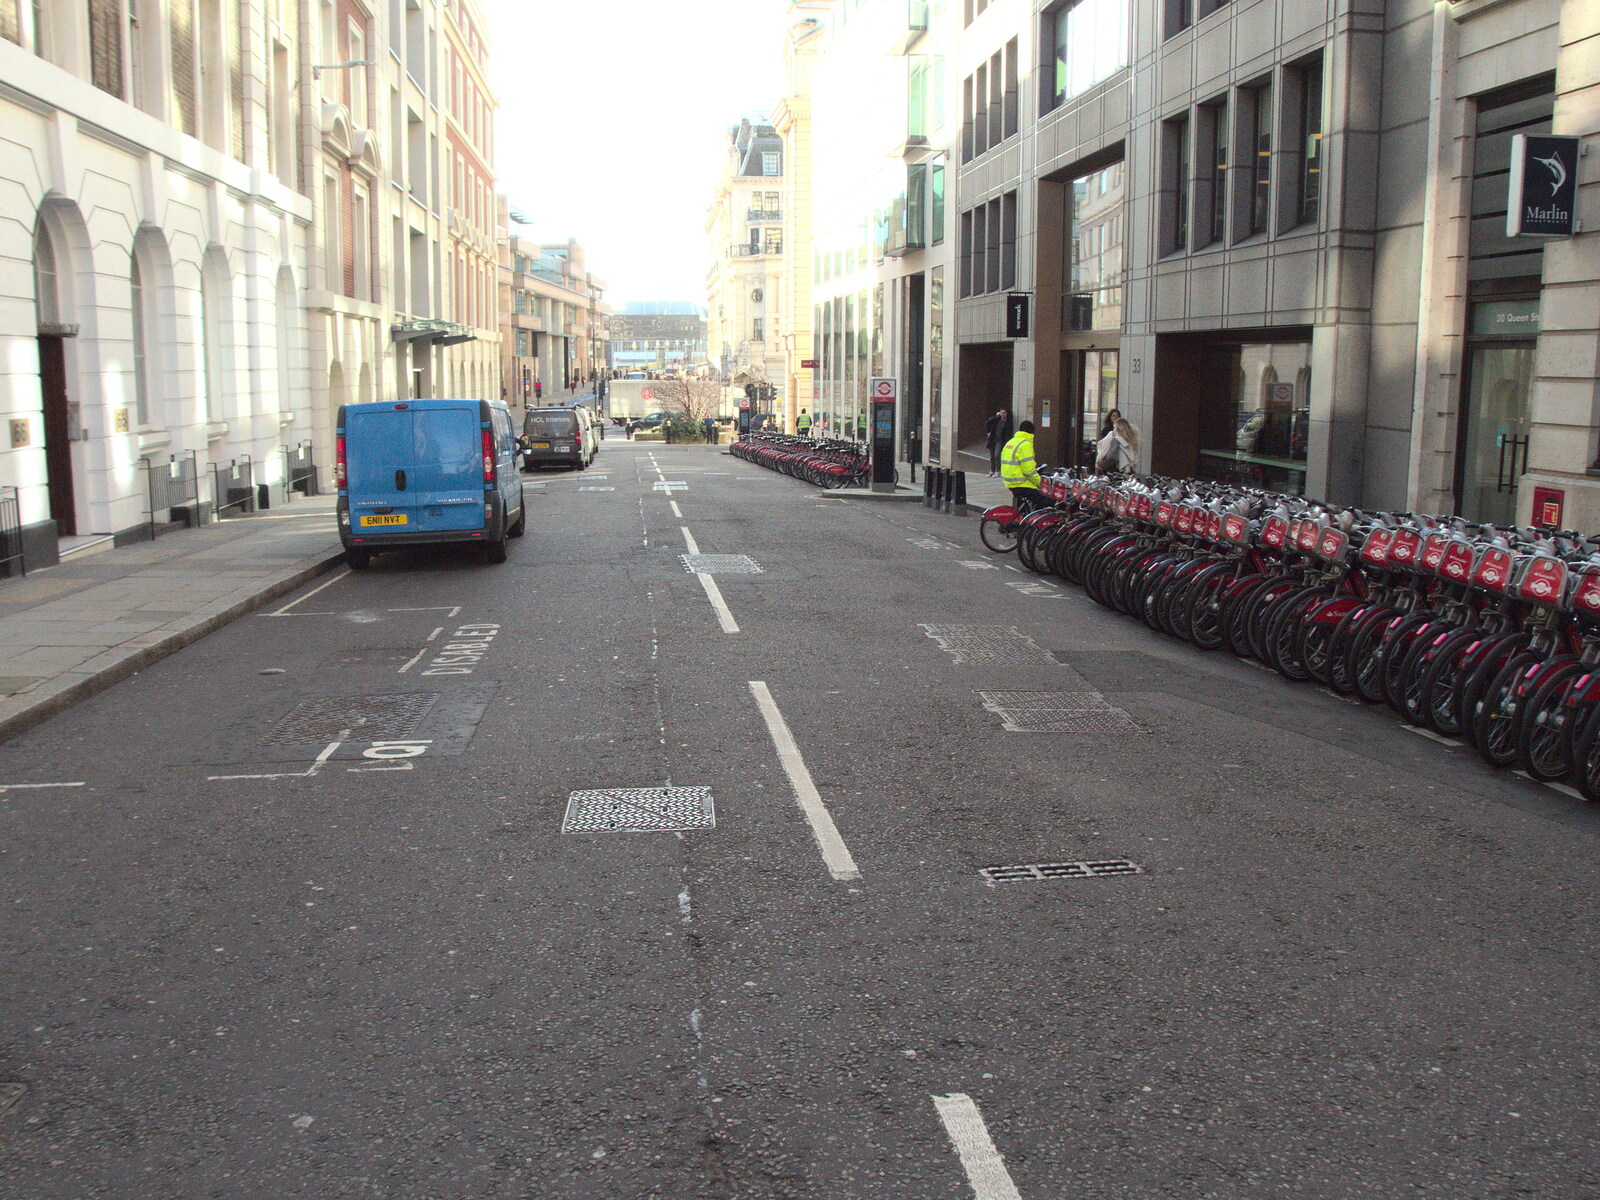 A million parked bikes on Queen Street Place from The Last Trip to the SwiftKey Office, Paddington, London - 23rd February 2022